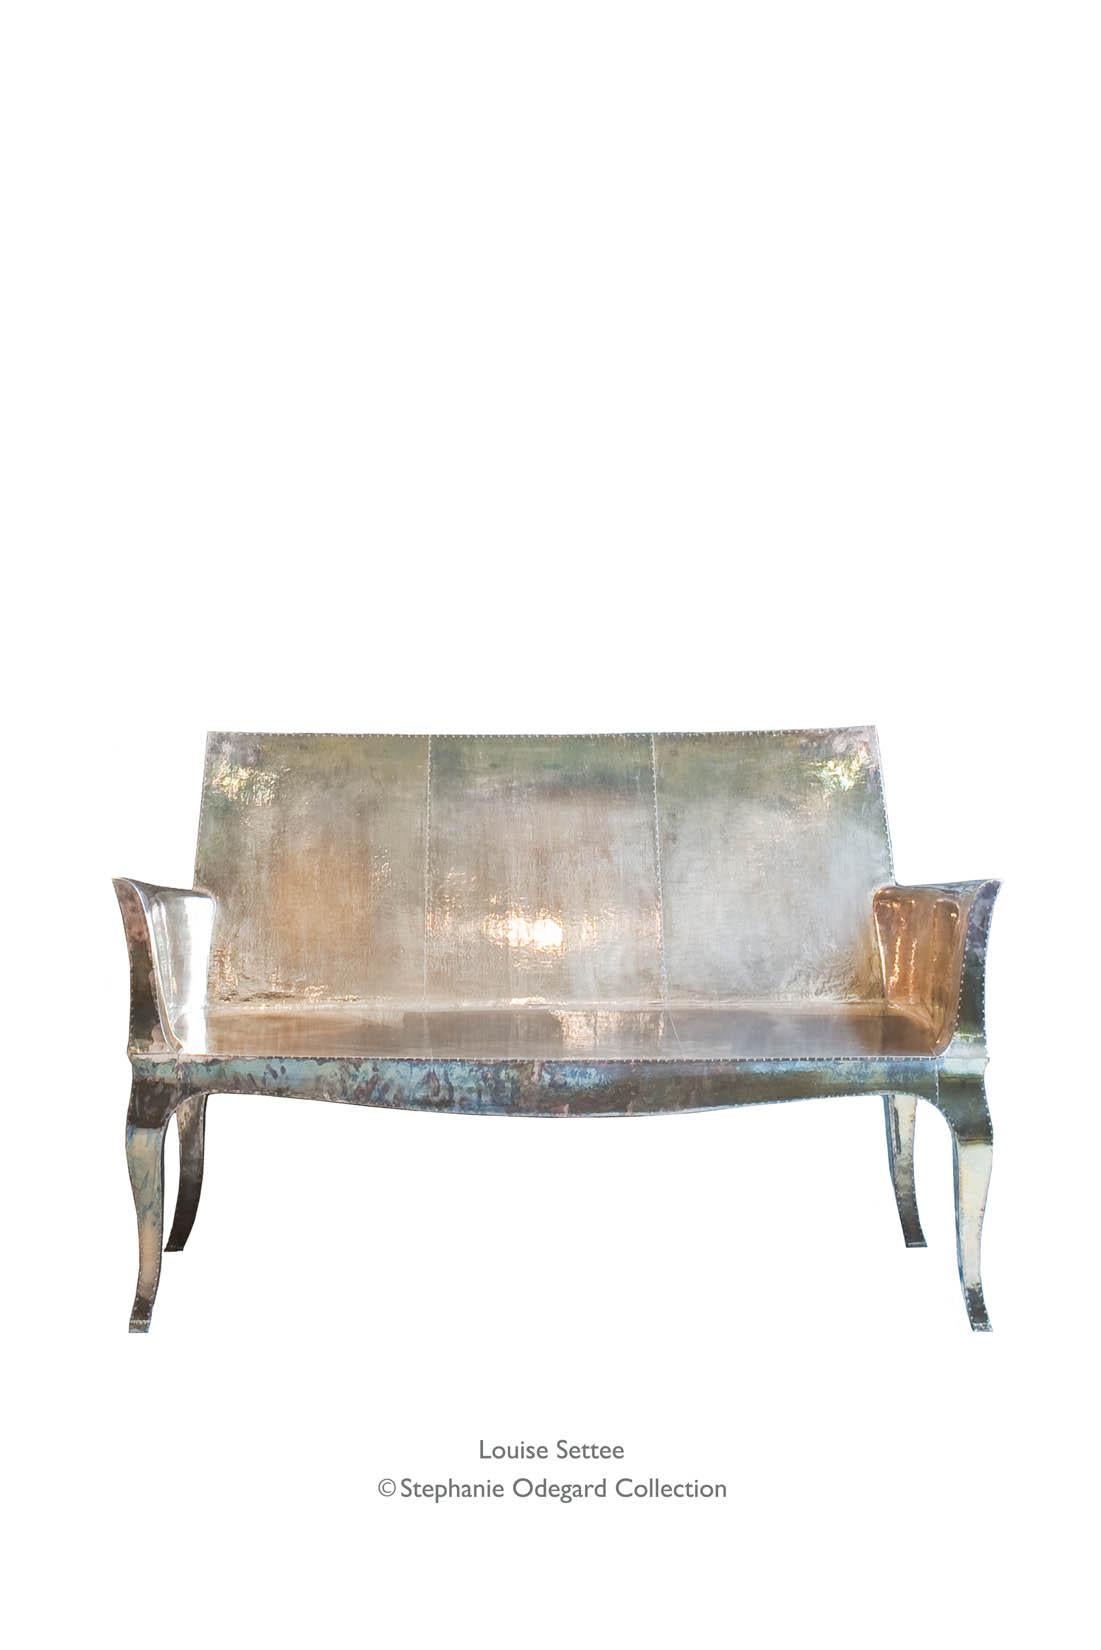 Louise Settee Art Deco Settees in Fine Hammered Copper by Paul Mathieu For Sale 6